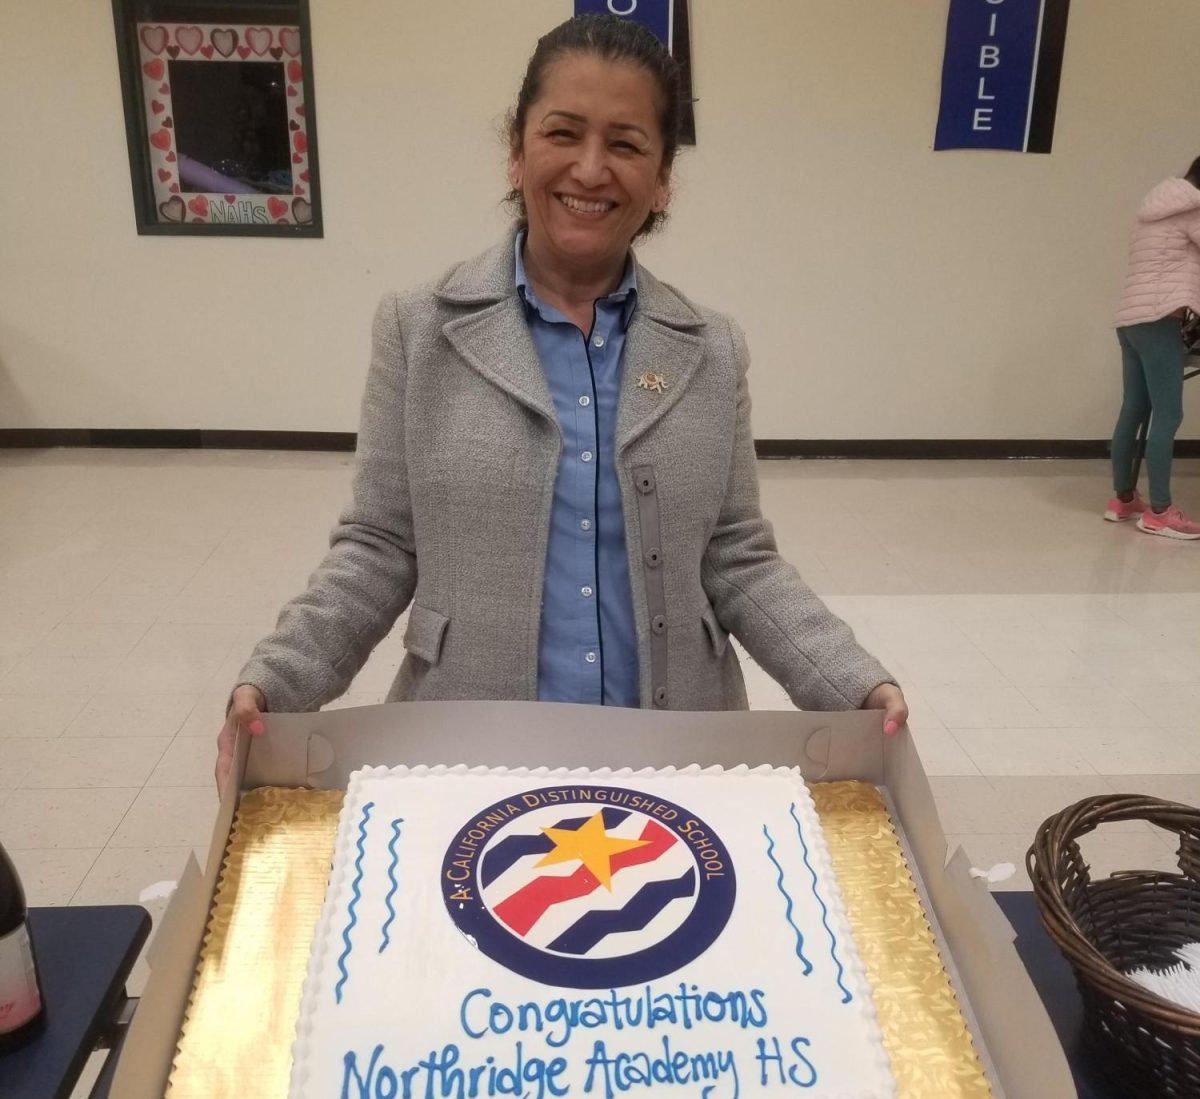 Proud Principal Castro presenting cake to the faculty, celebrating the honor.